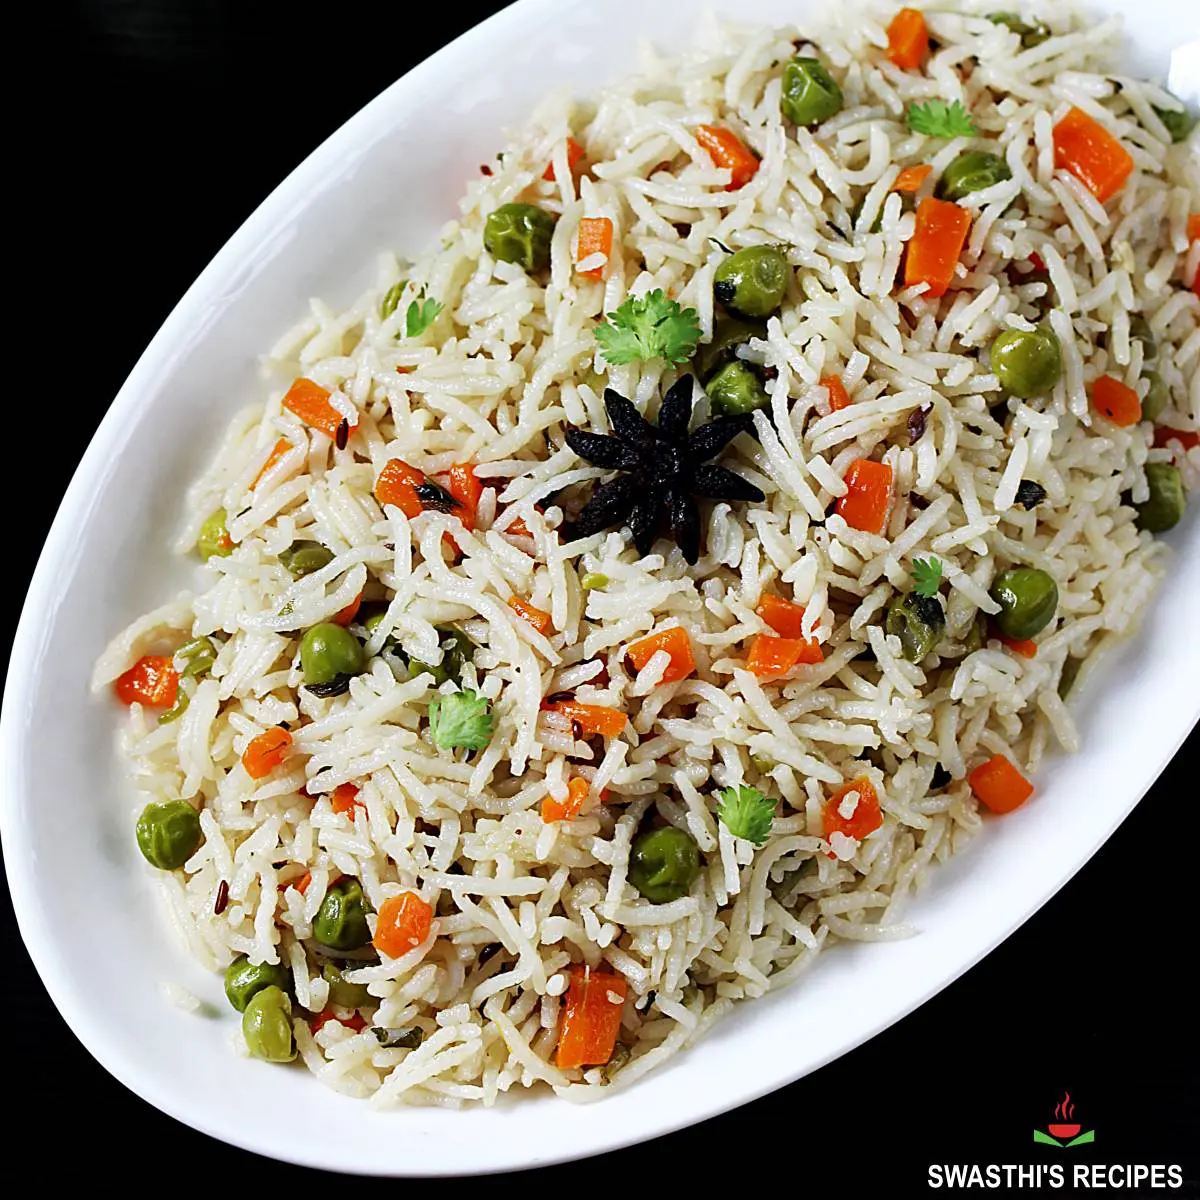 Veg pulao recipe made with basmati rice, vegetables and spices